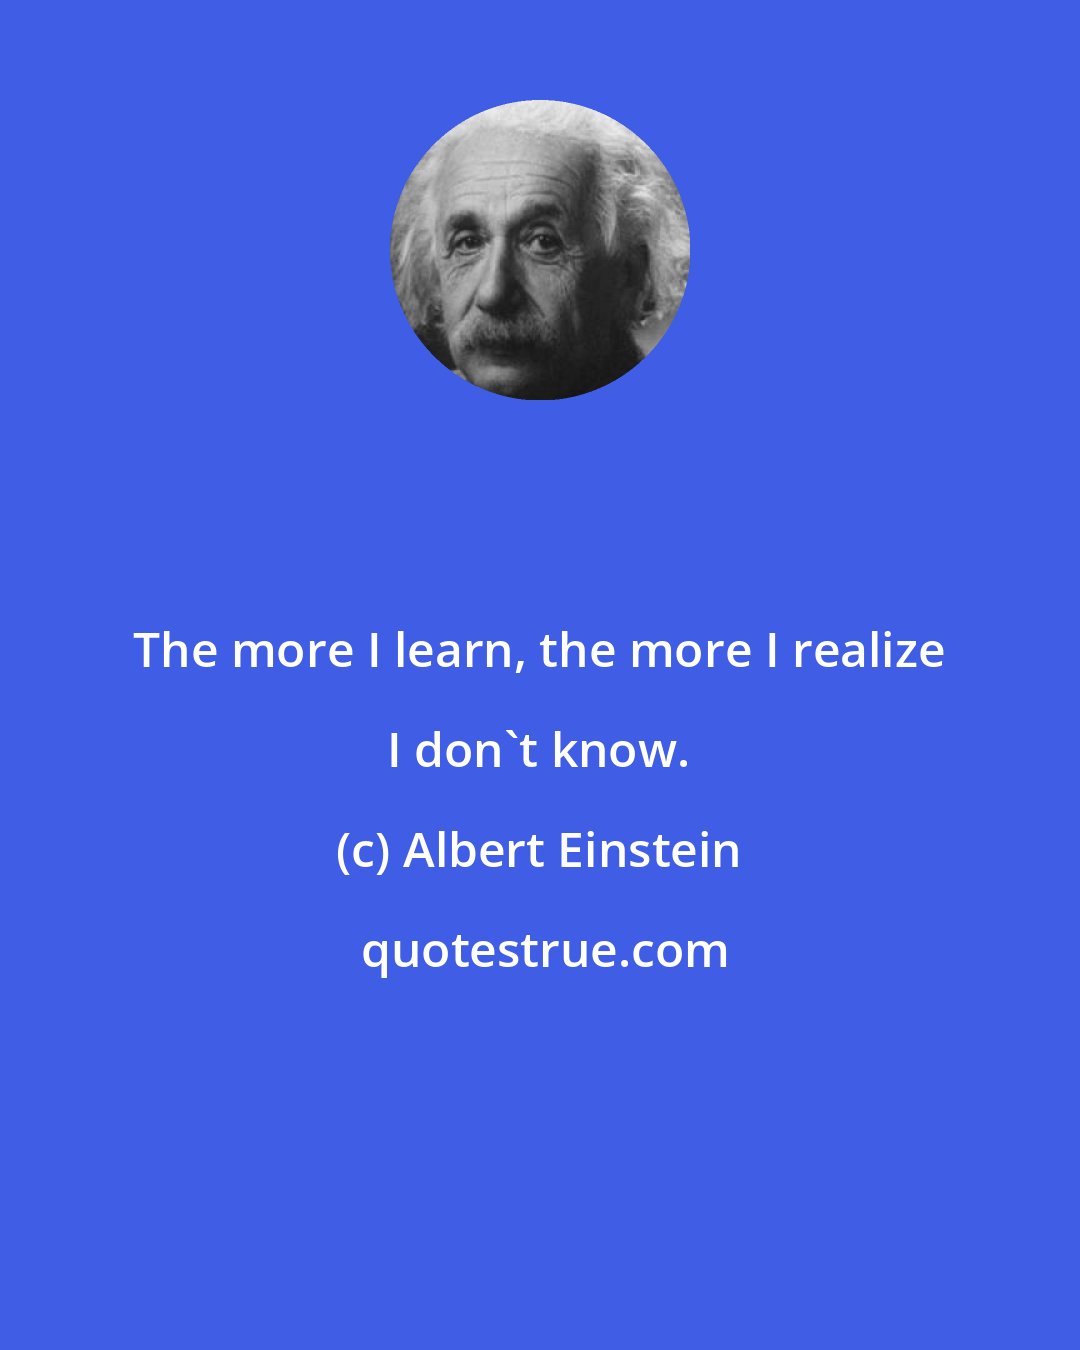 Albert Einstein: The more I learn, the more I realize I don't know.